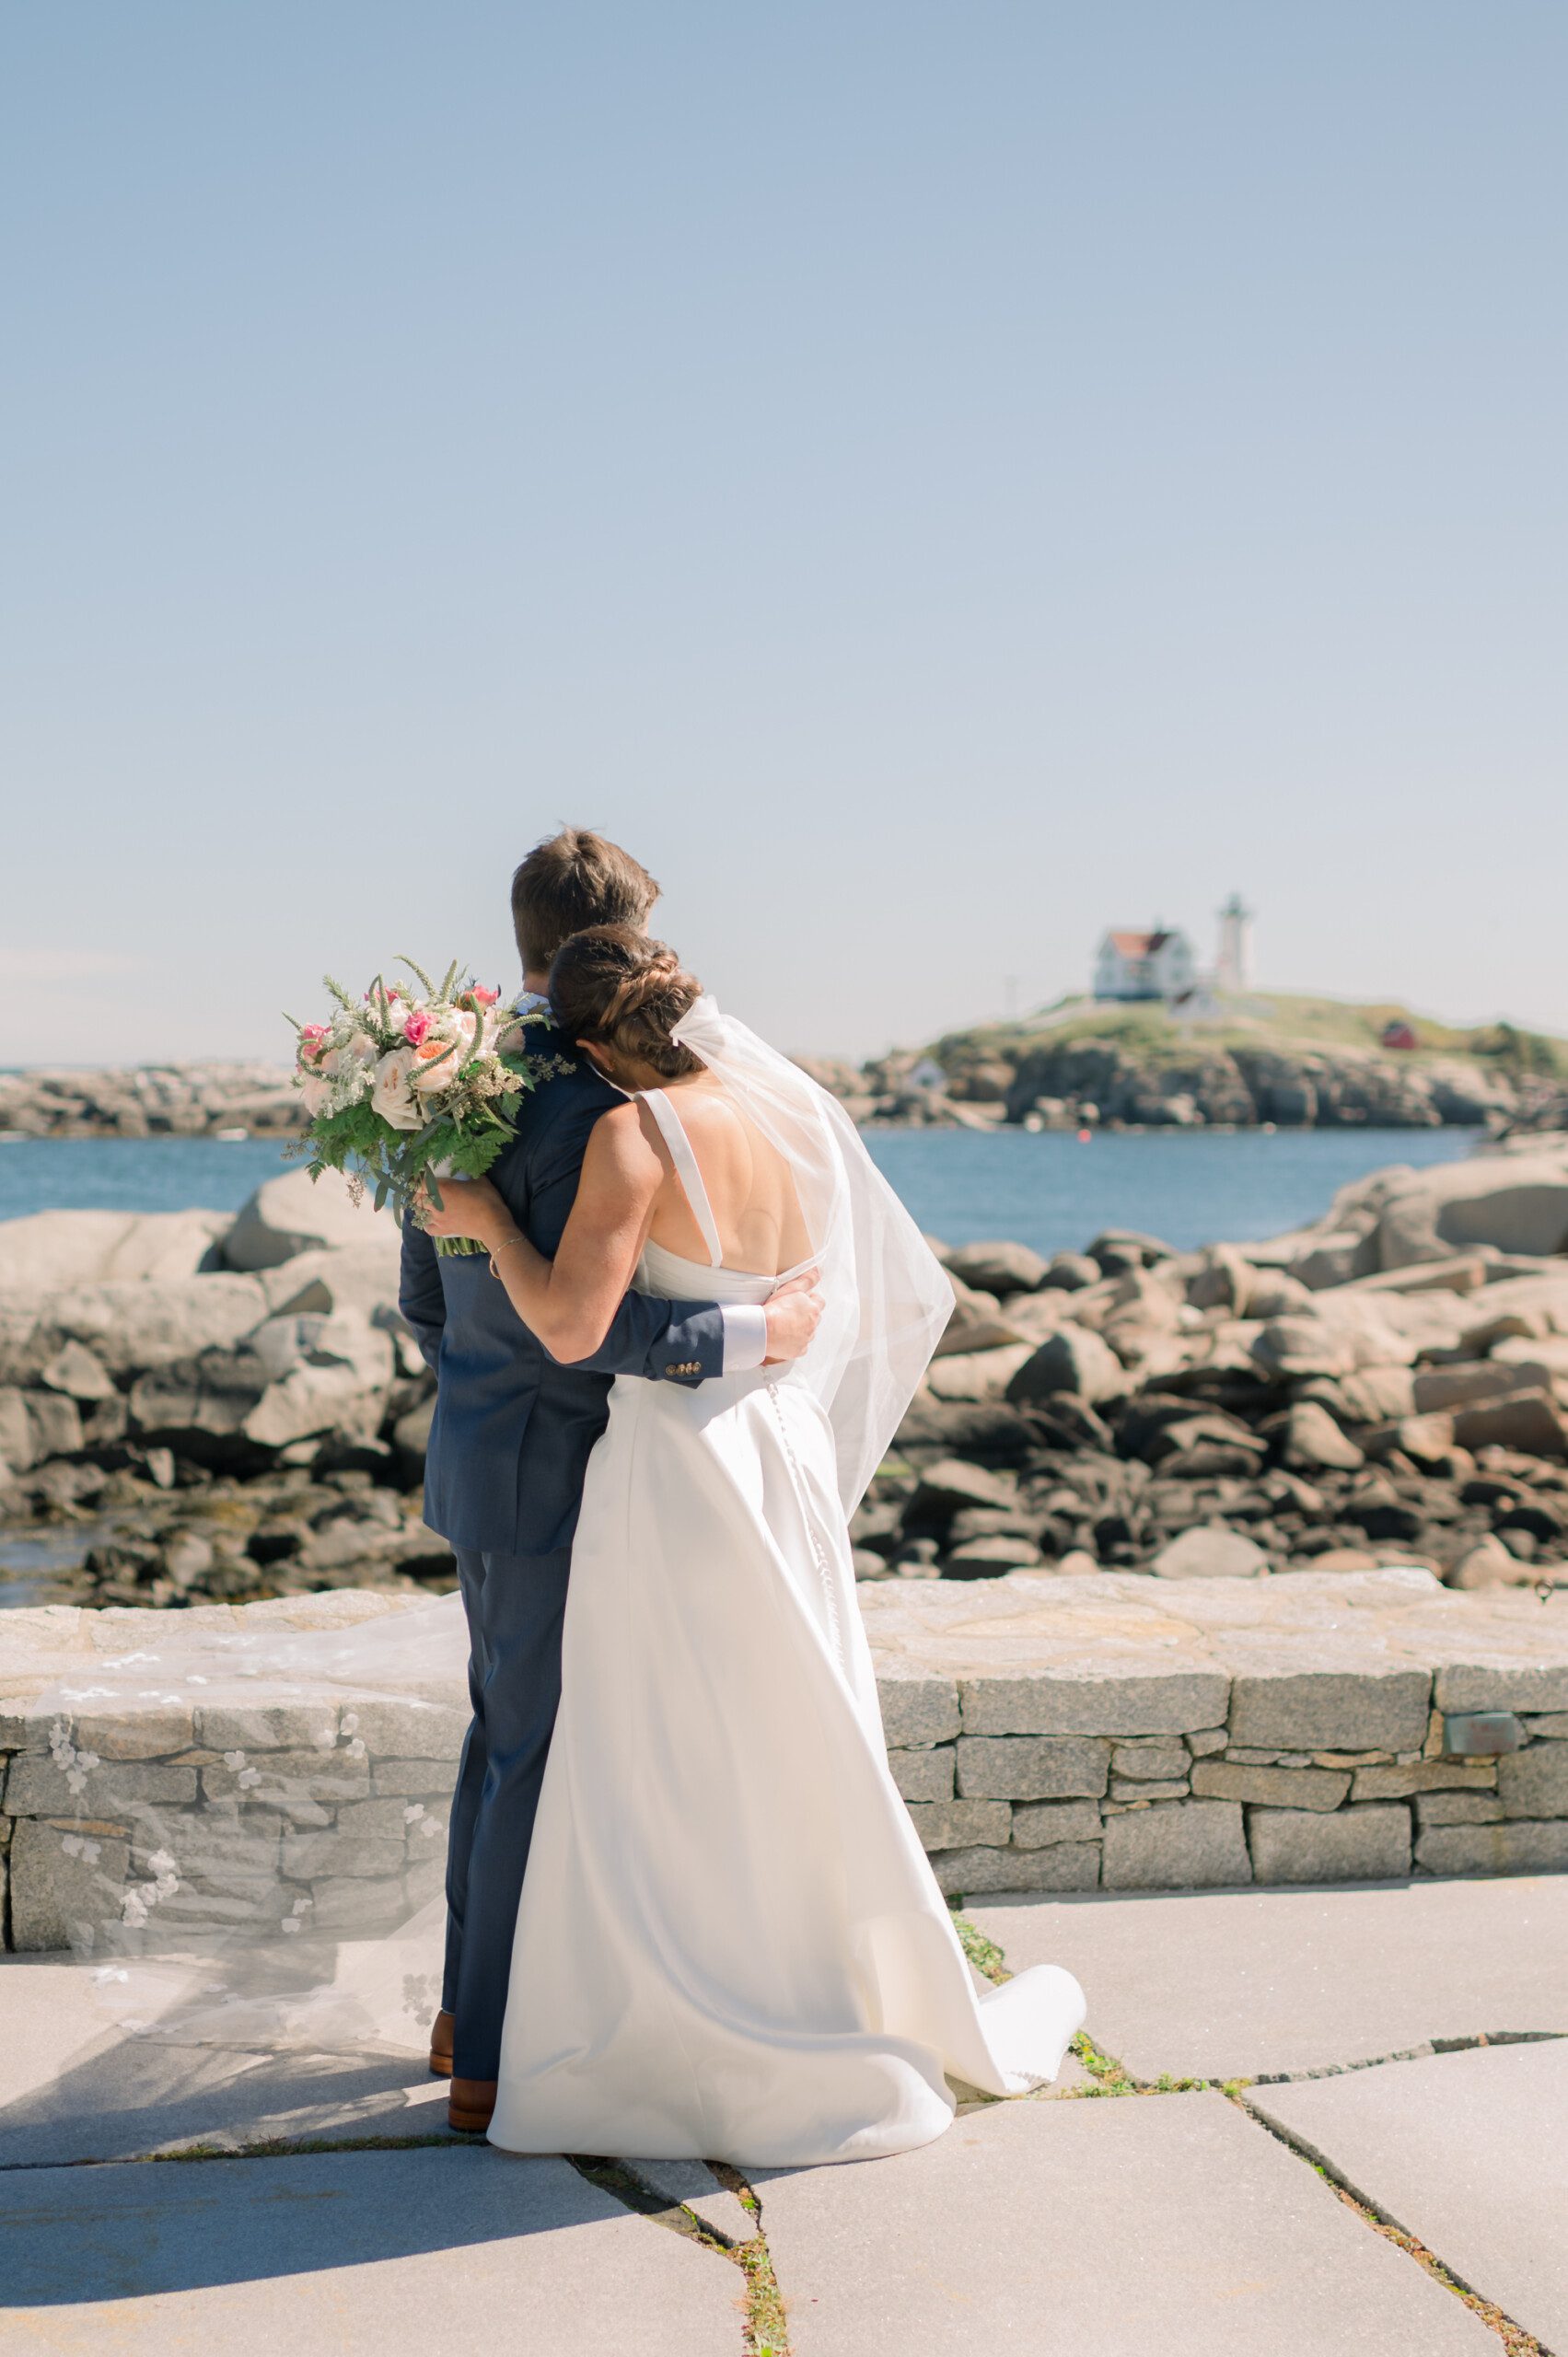 York Maine weddings at Viewpoint Hotel overlooking Nubble Lighthouse